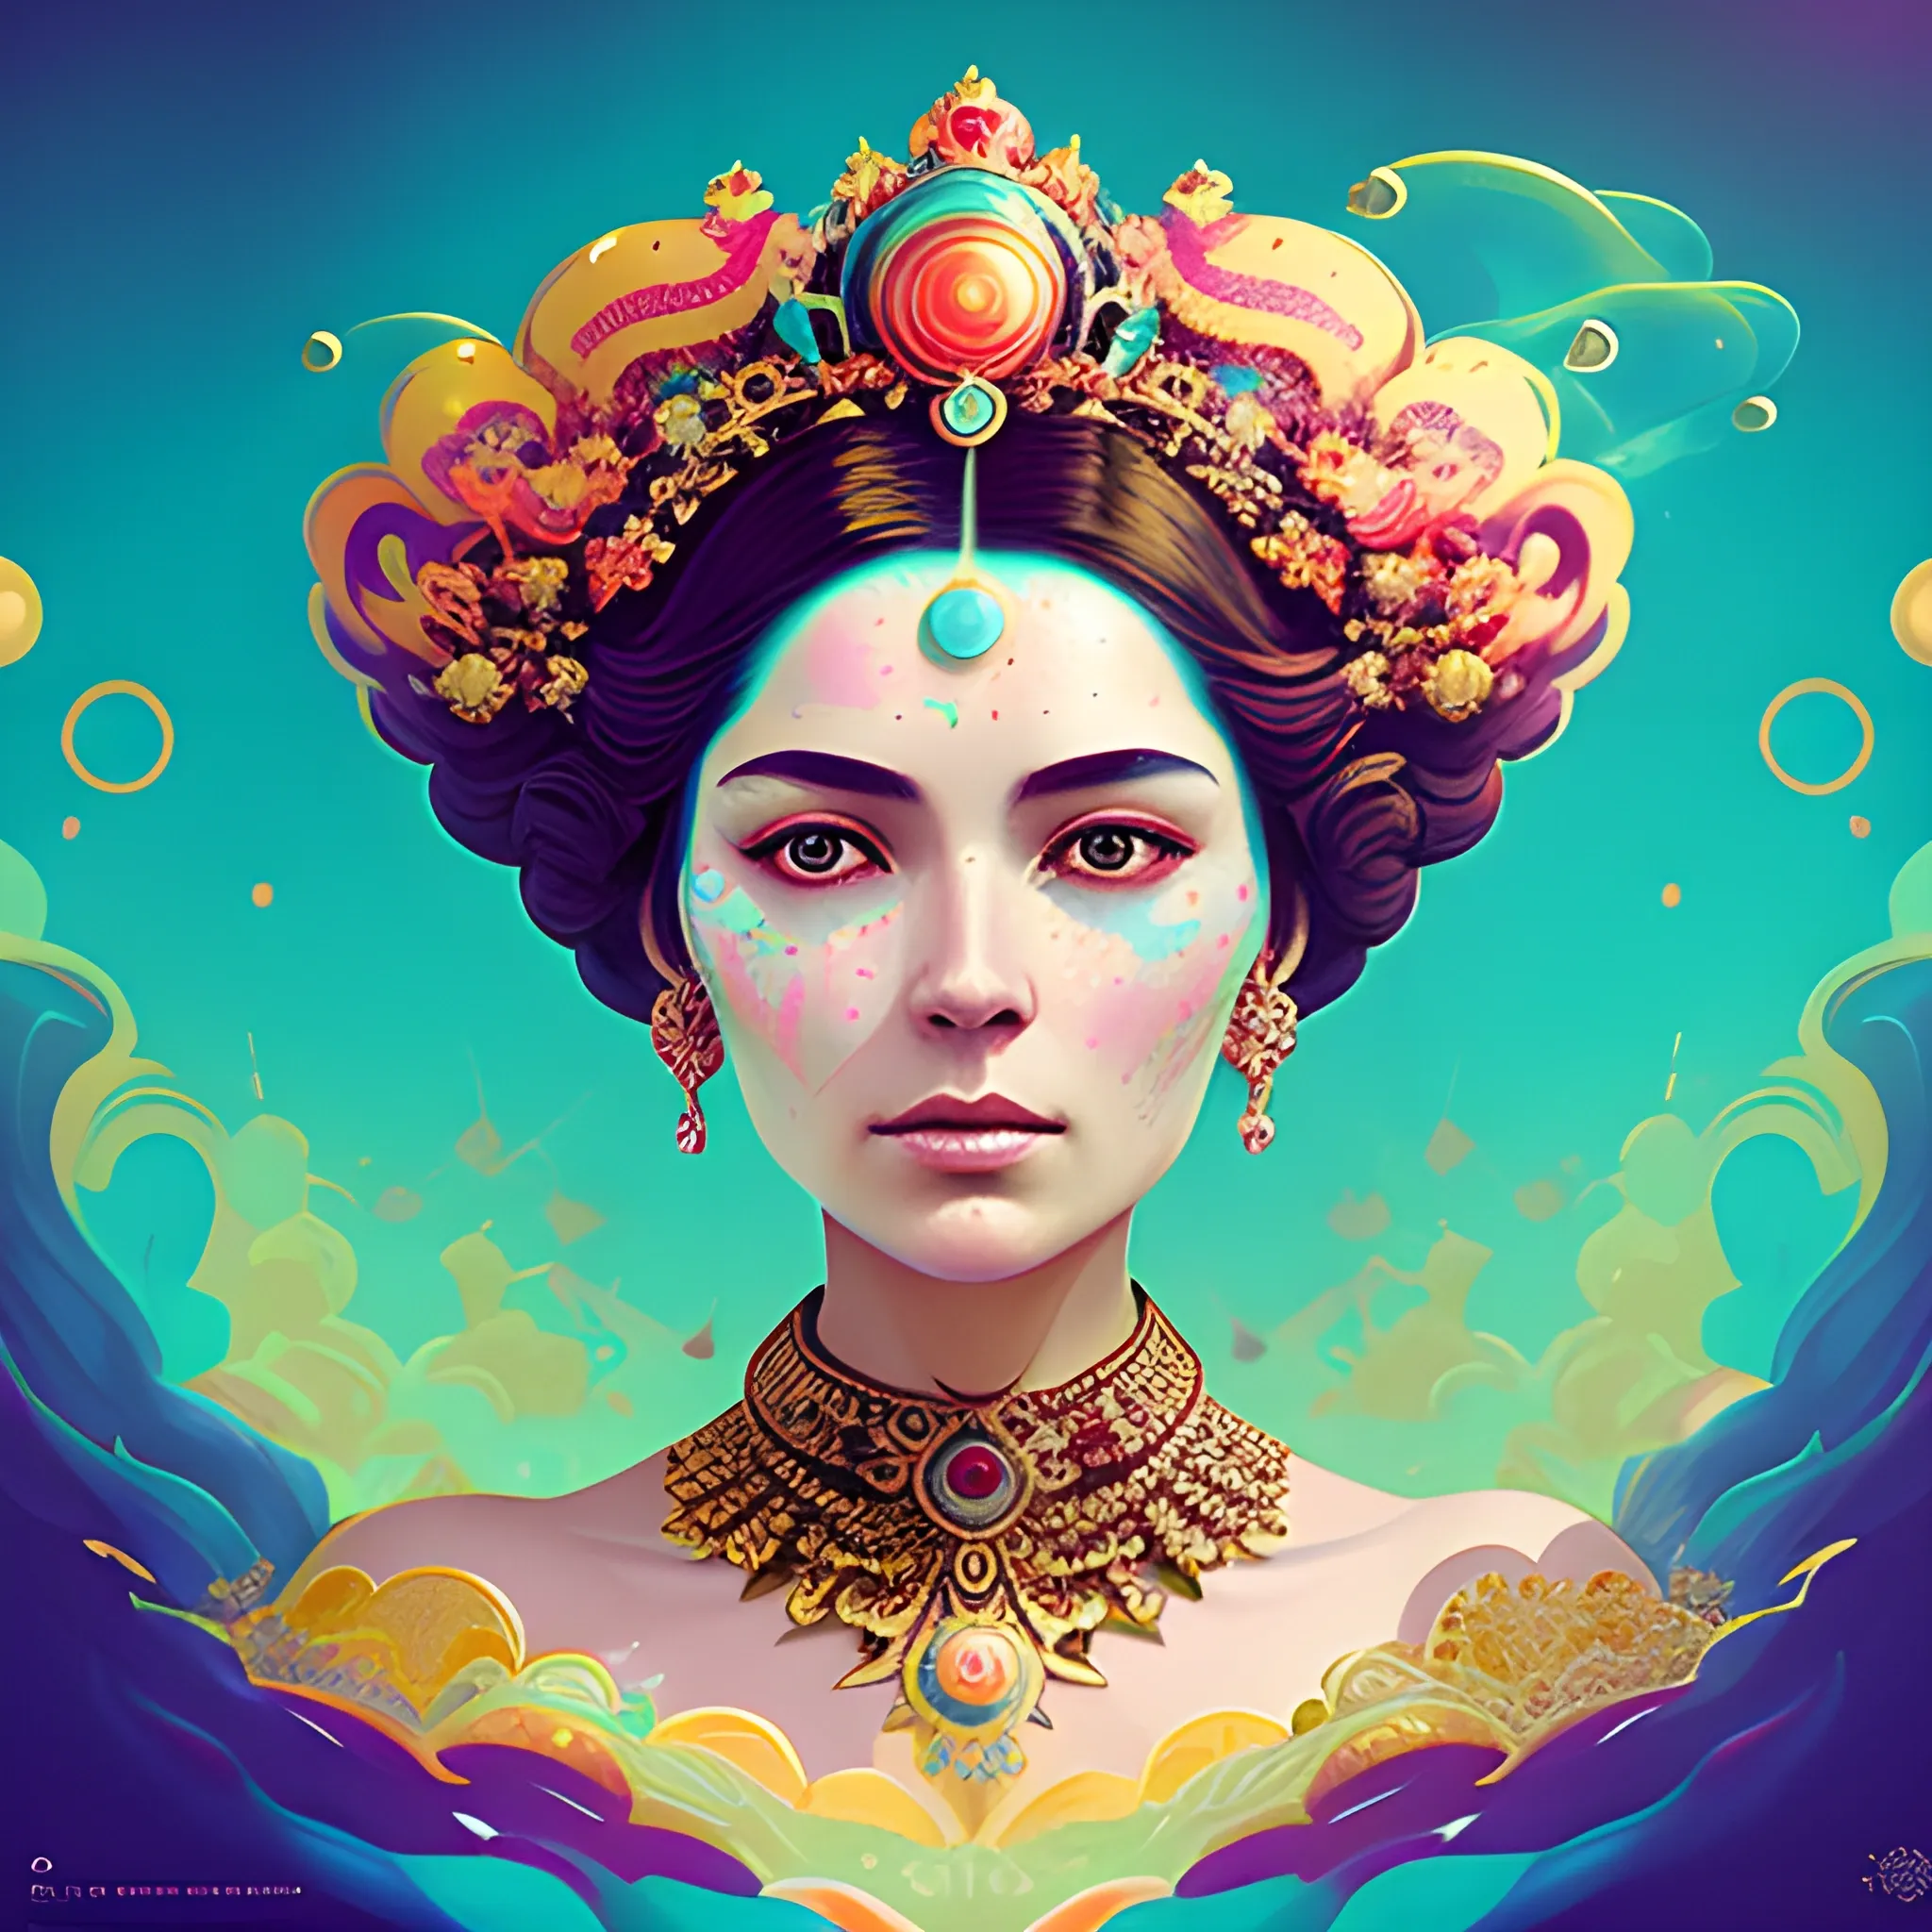 Flowery beautiful face and shoulders of an empress with gold jewellery, by petros afshar, ross tran, Tom Bagshaw, tom whalen, underwater bubbly psychedelic clouds, Anaglyph 3D lens blur effect